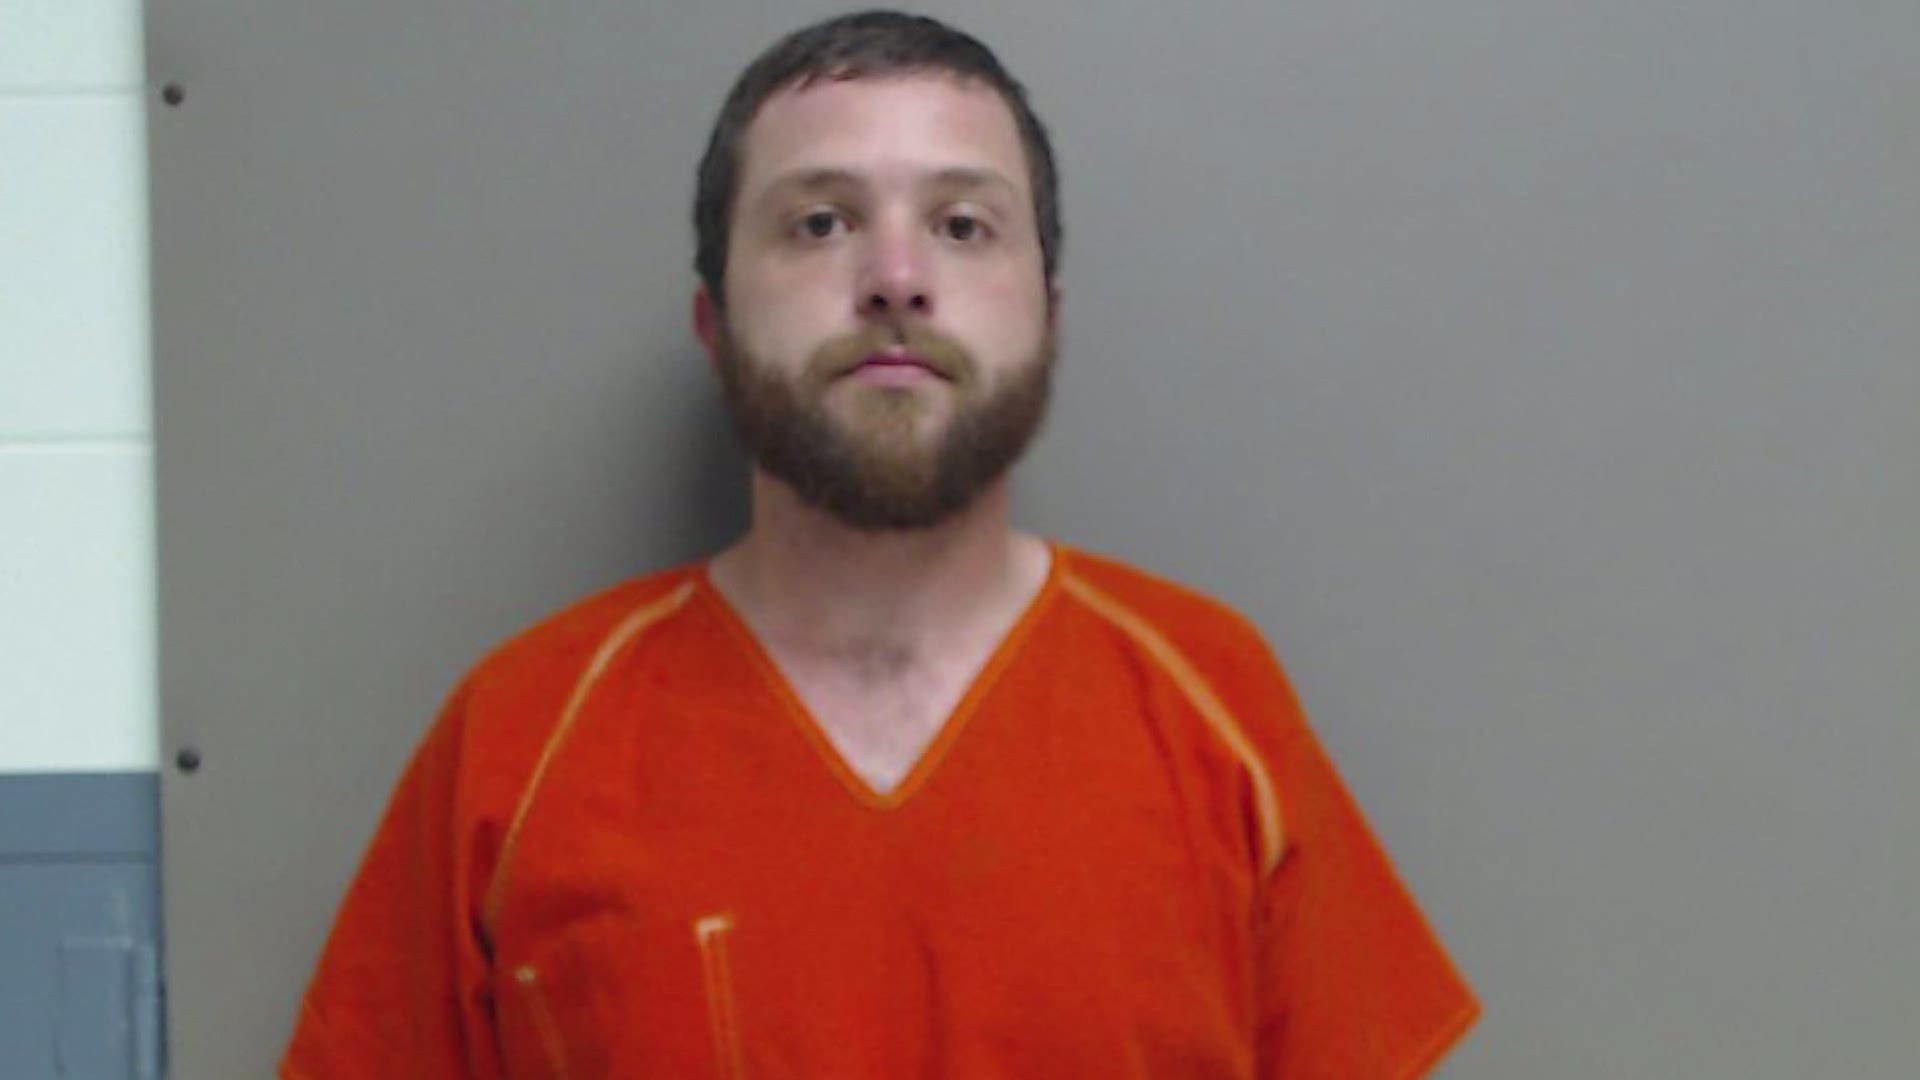 Dylan Walker, 27, was arrested Thursday afternoon. He is facing a charge of tampering with evidence.